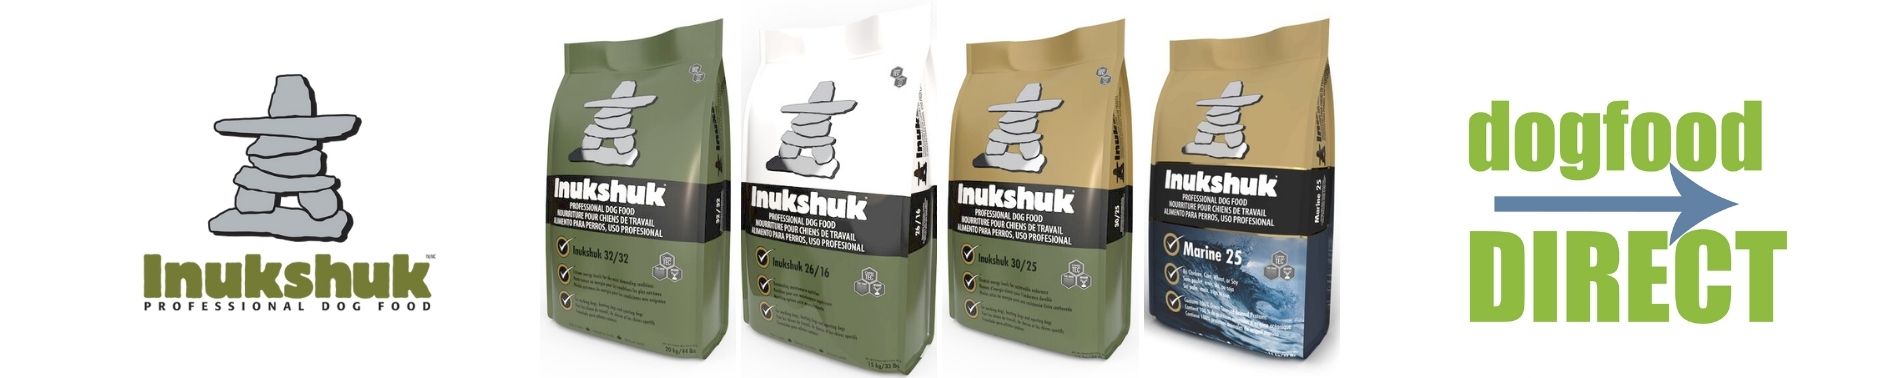 Inukshuk Dog Food Direct from our store to your door